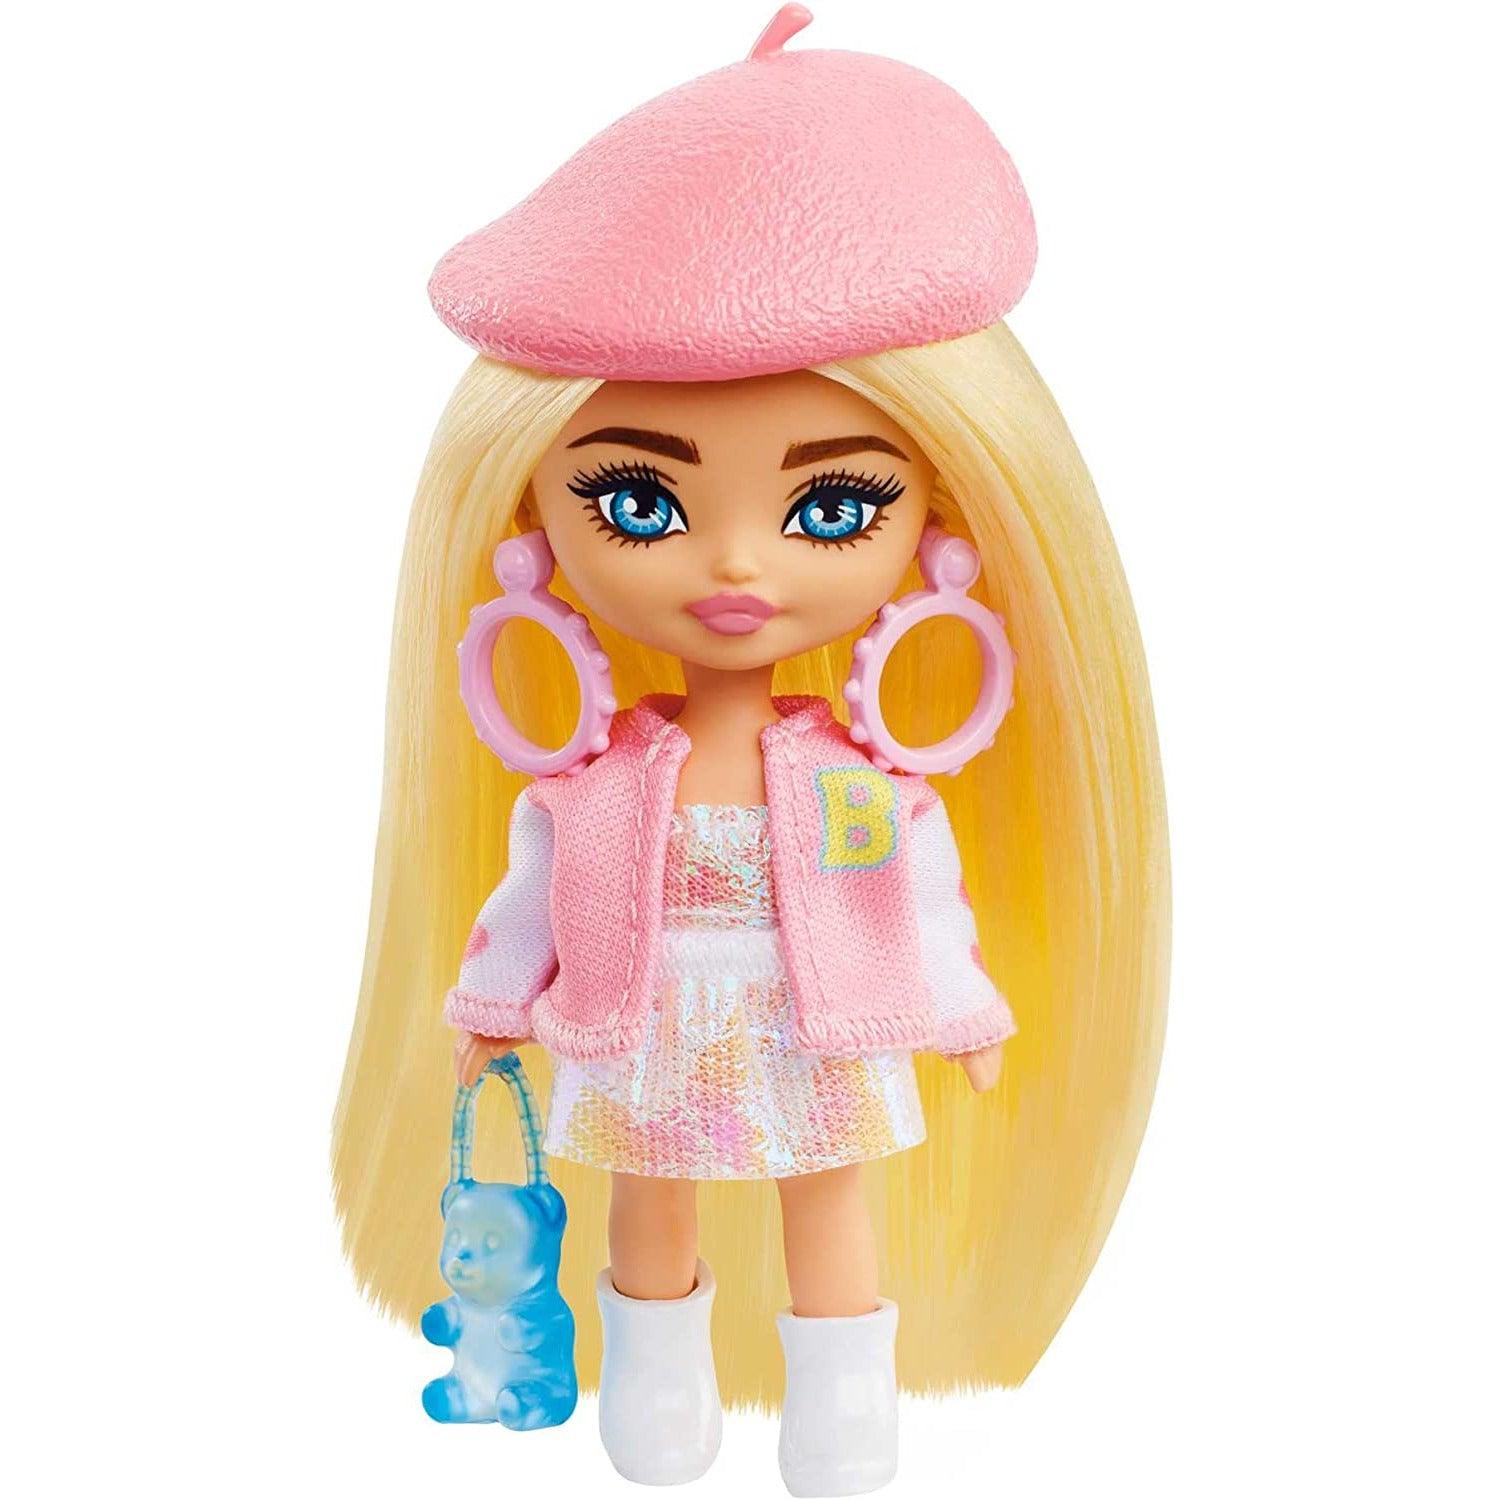 Barbie Extra Mini Minis Doll with Blonde Hair, Beret, Varsity Jacket & Accessories & Stand, 3.25-Inch